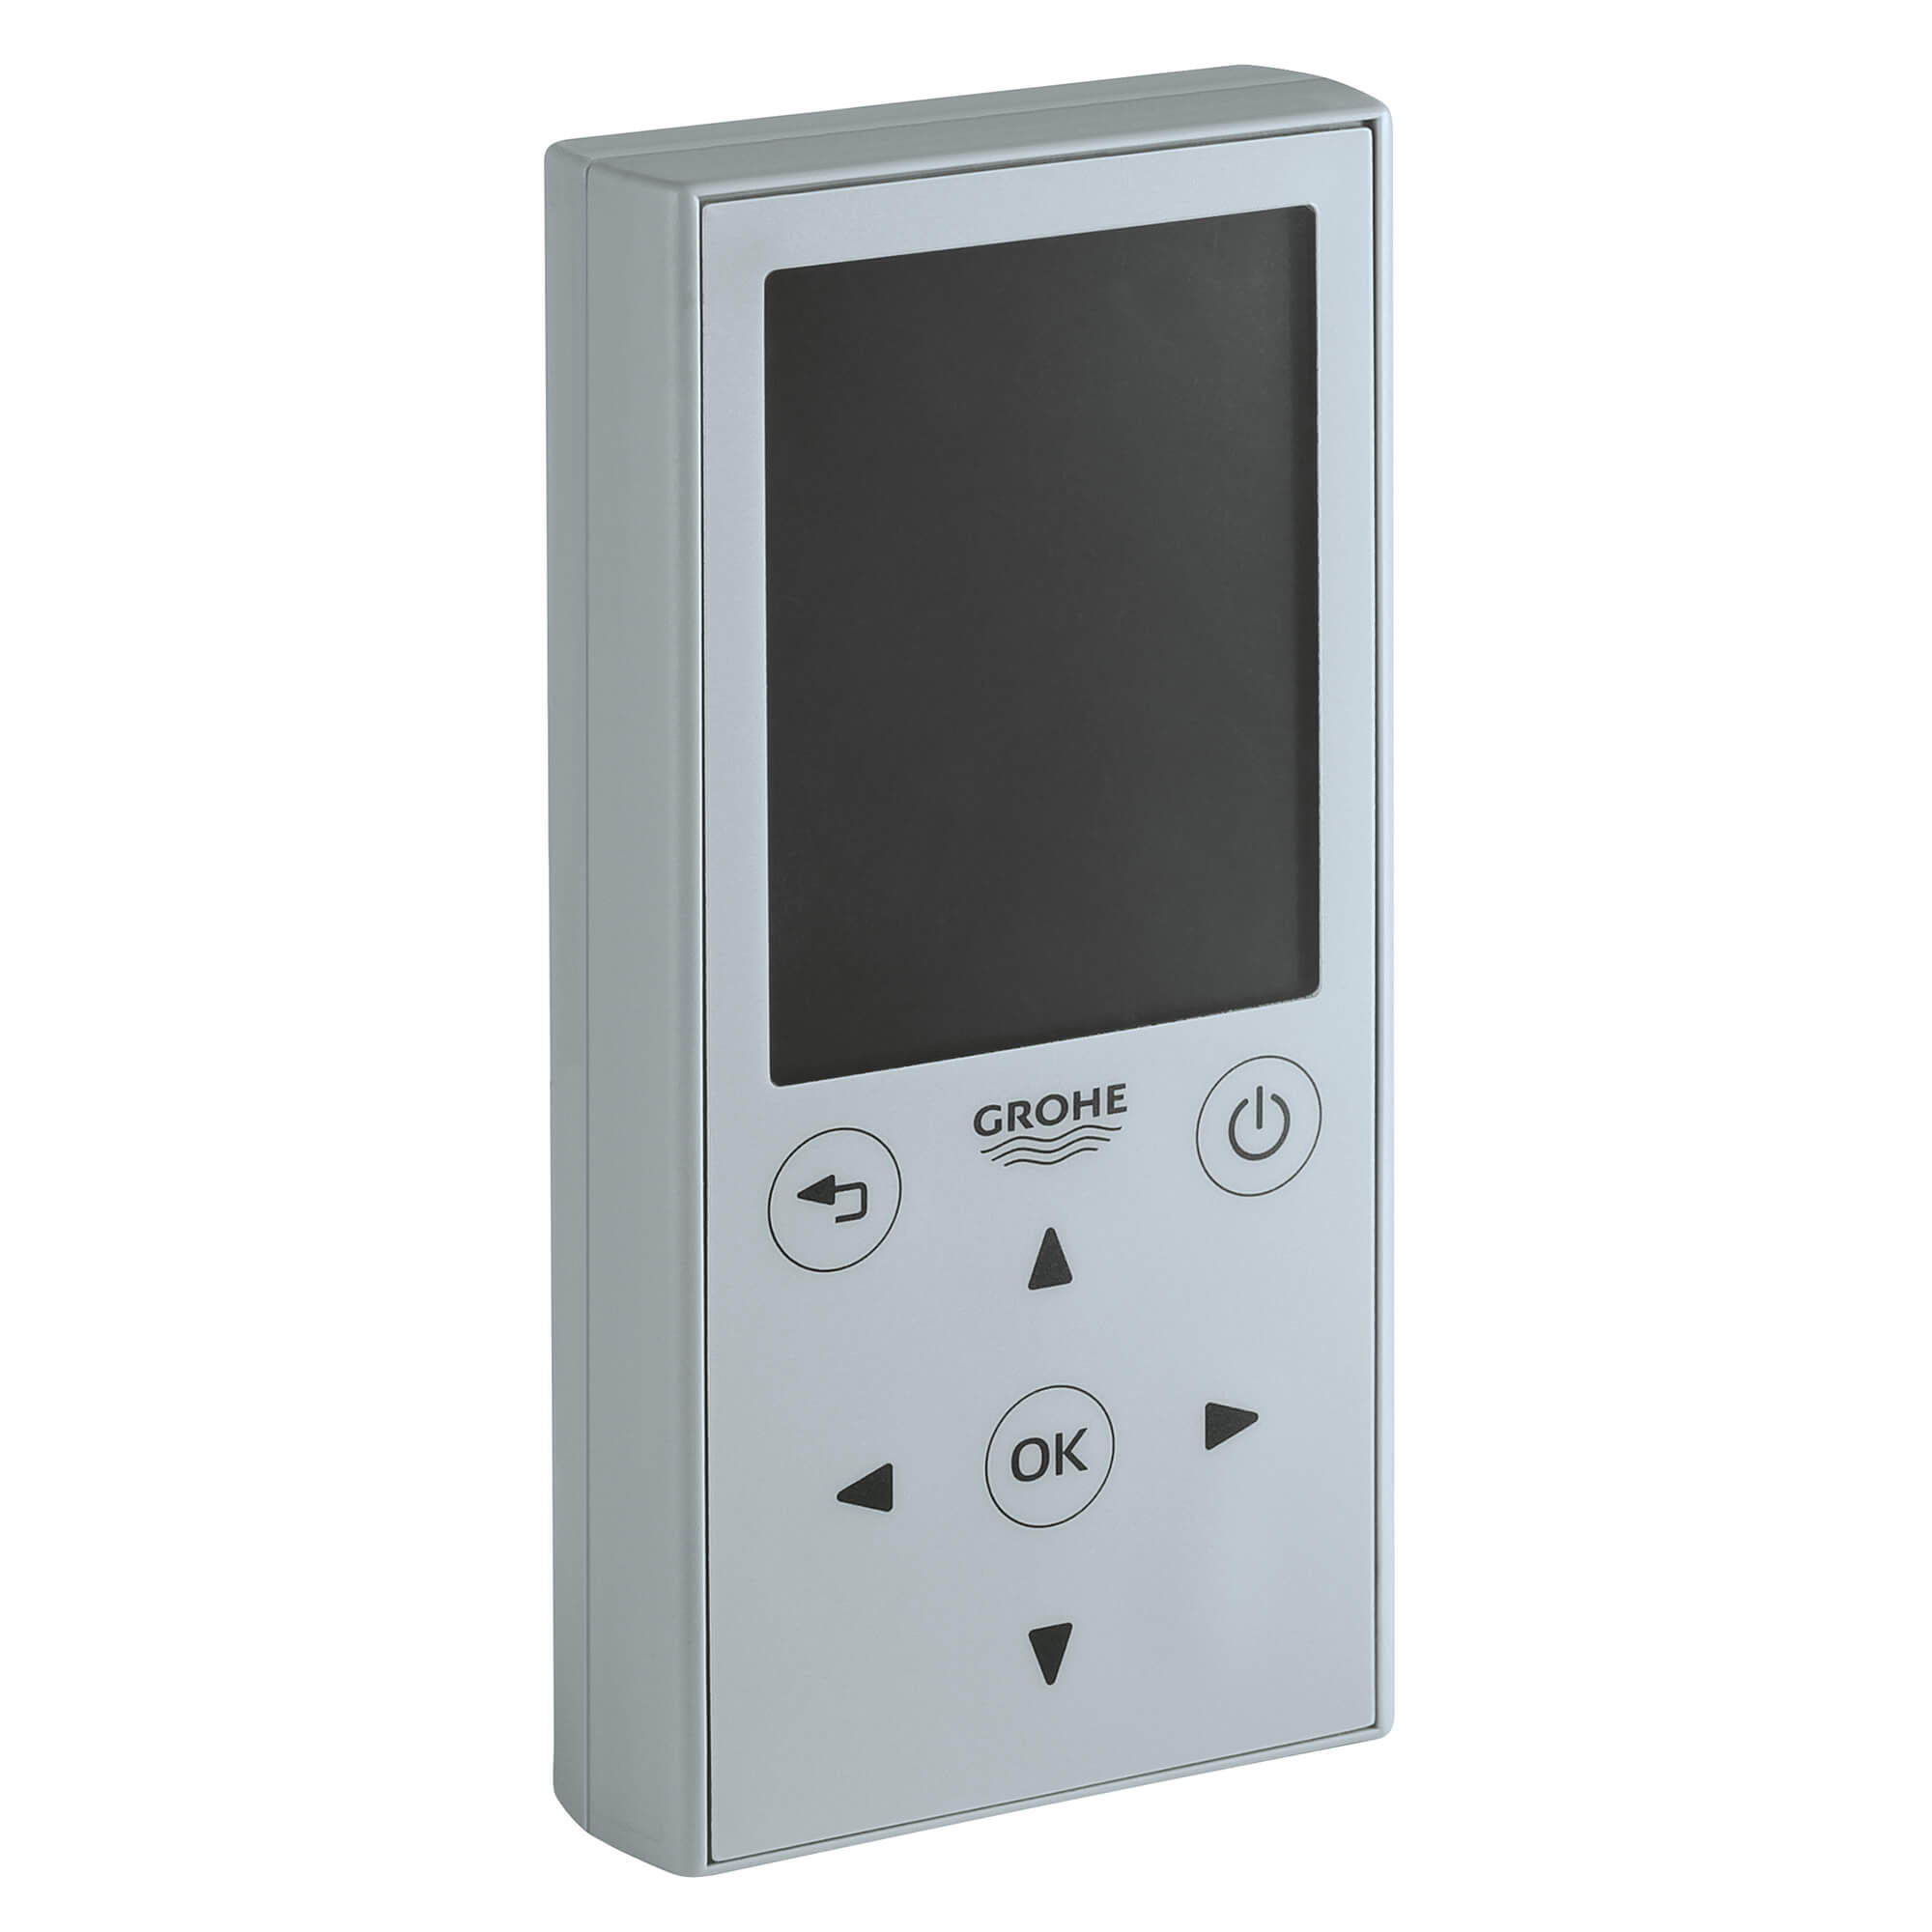 Remote control for all GROHE infra-red products